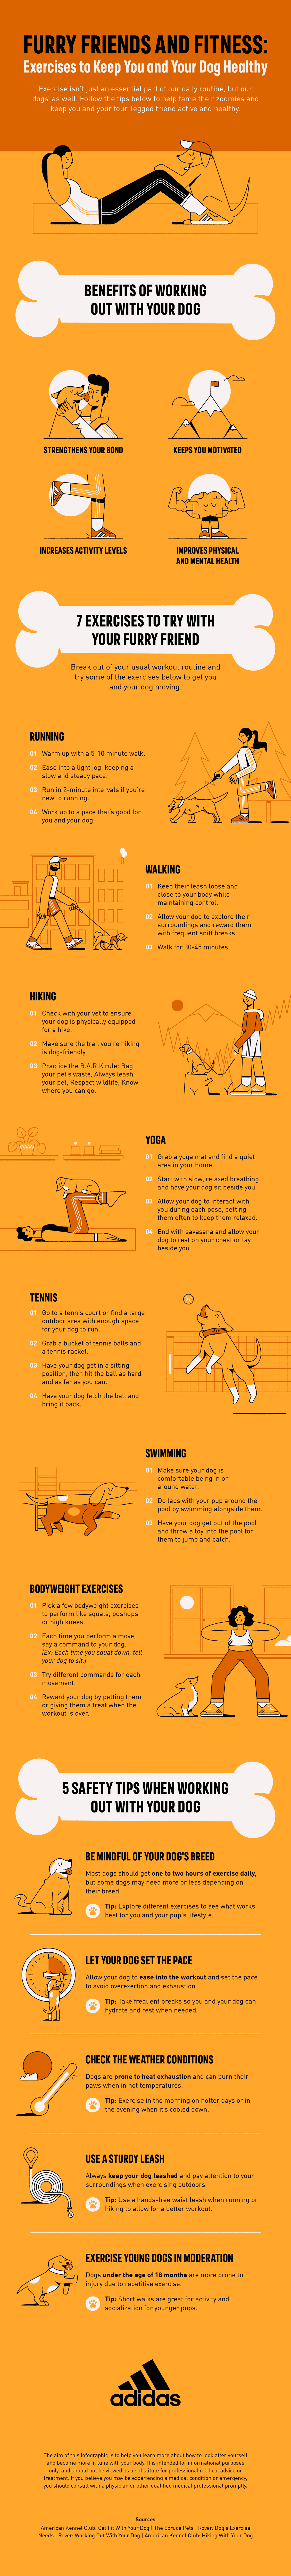 Infographic illustrating 7 exercises to keep you and your dog healthy along with 5 safety tips for working out with your dog.